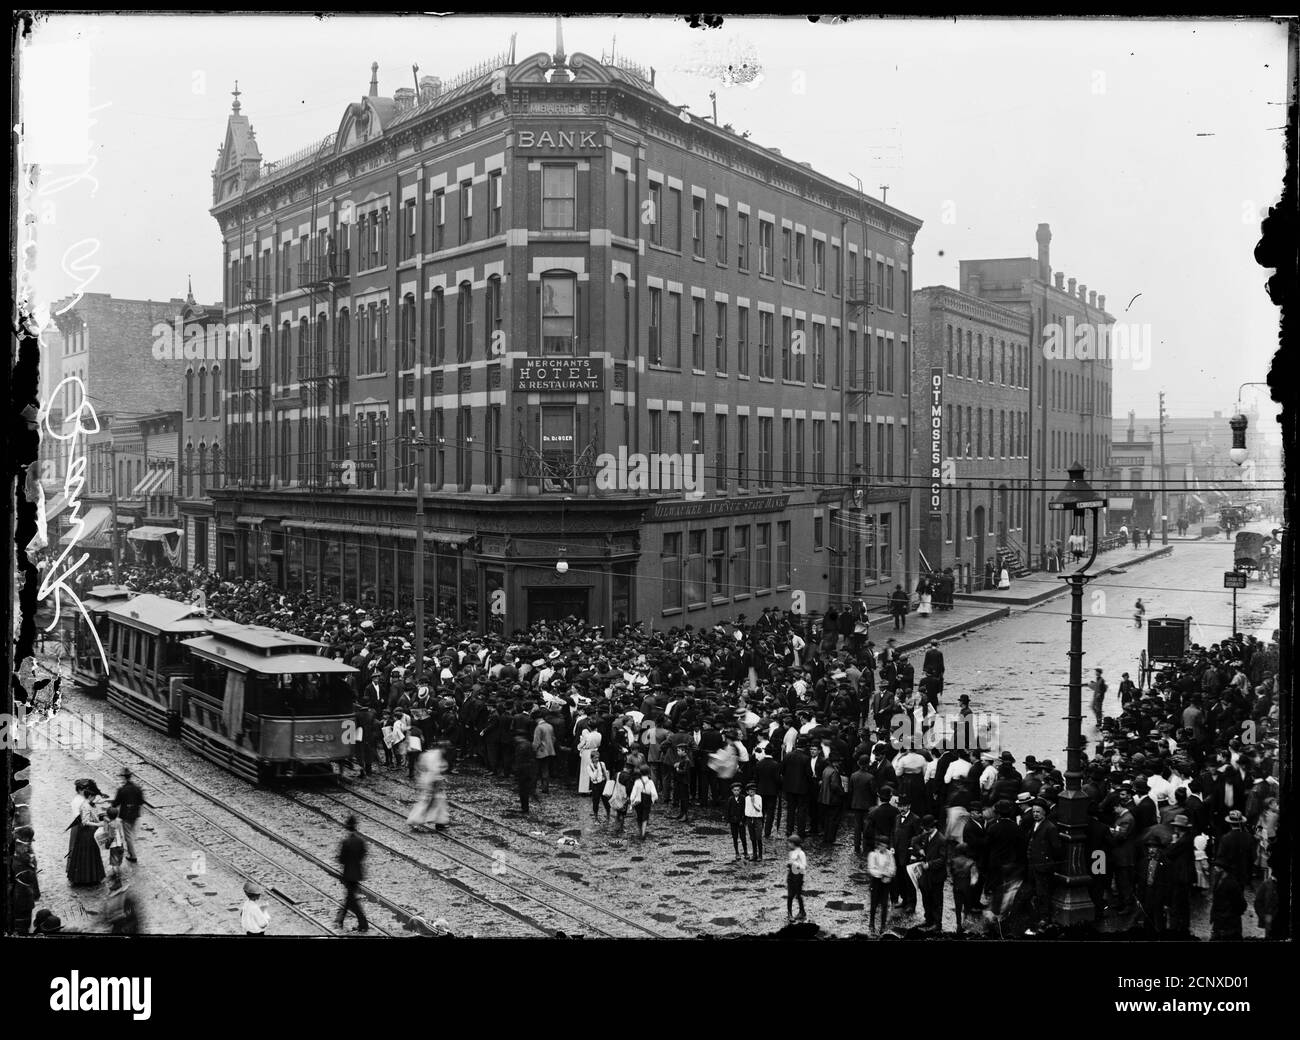 Crowd gathered in front of the Milwaukee Avenue Bank during a bank failure, Chicago, Illinois Stock Photo